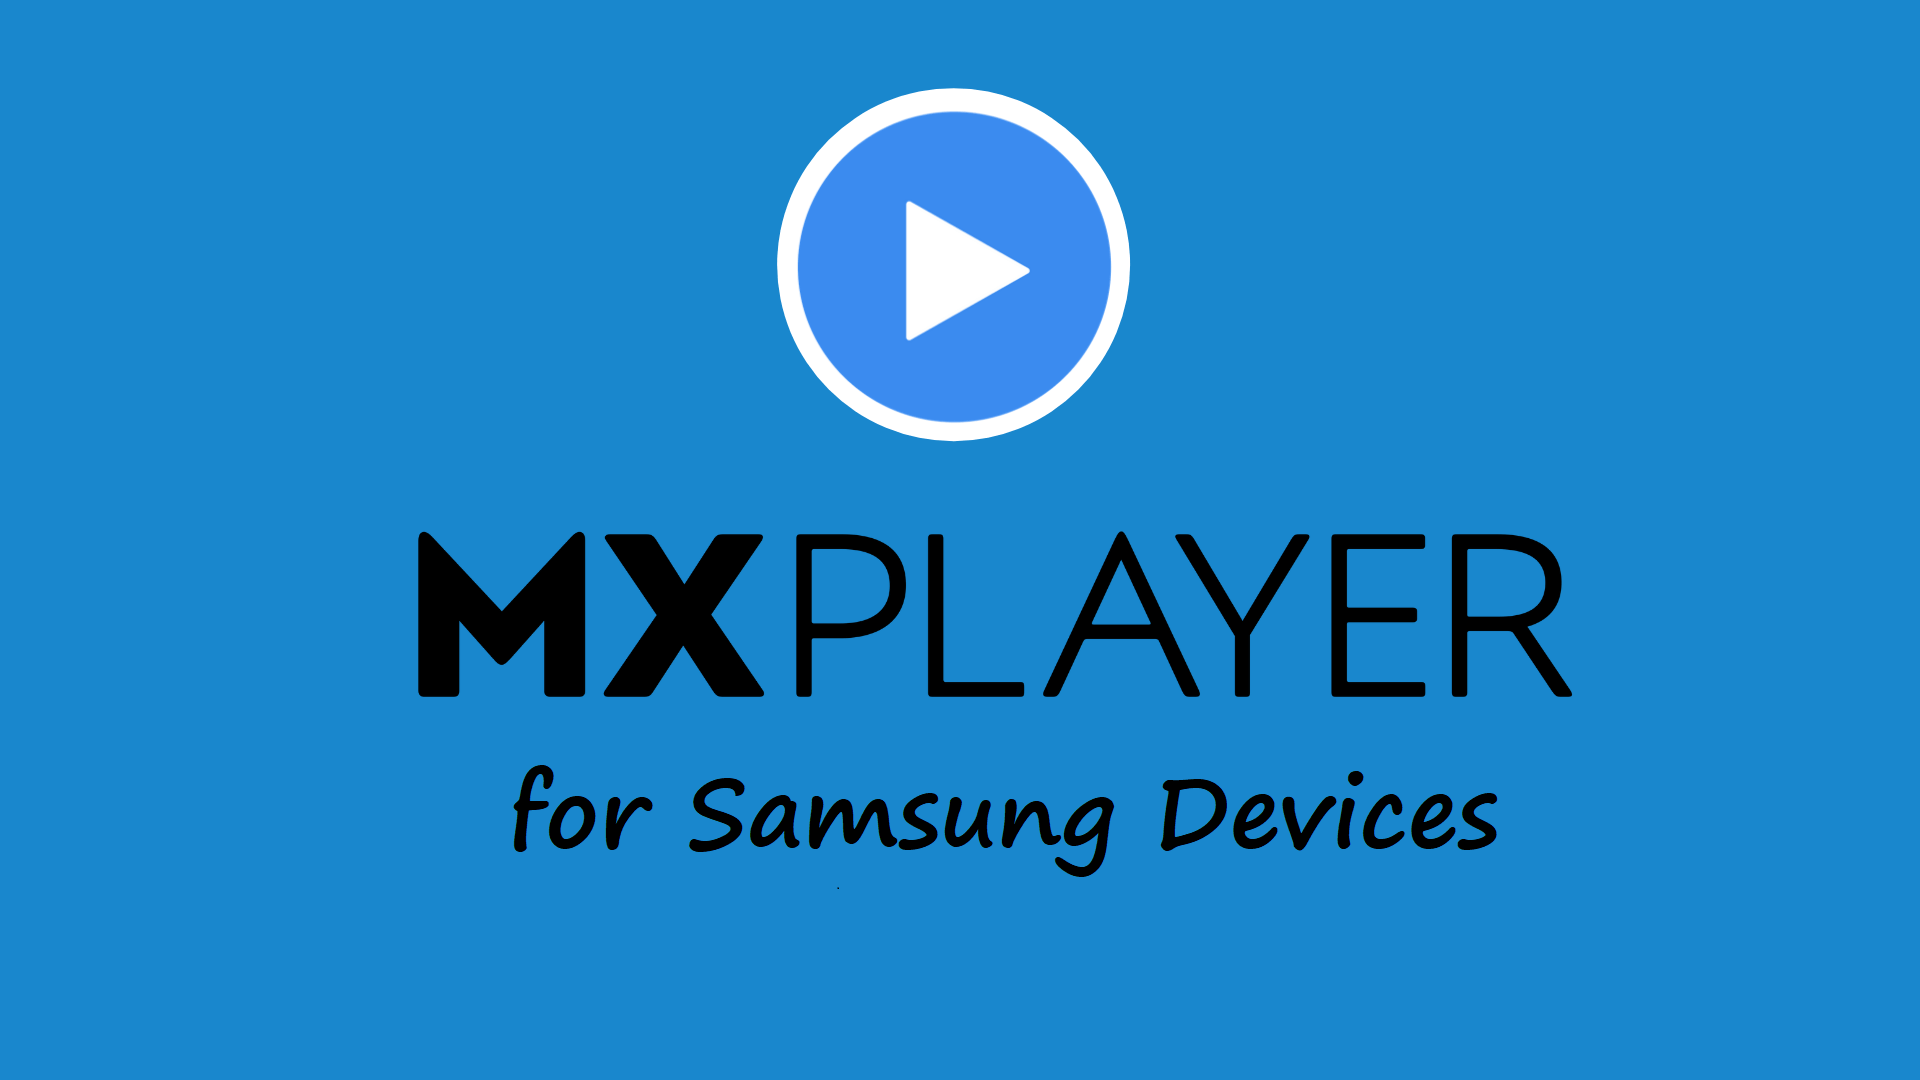 MX Player for Samsung